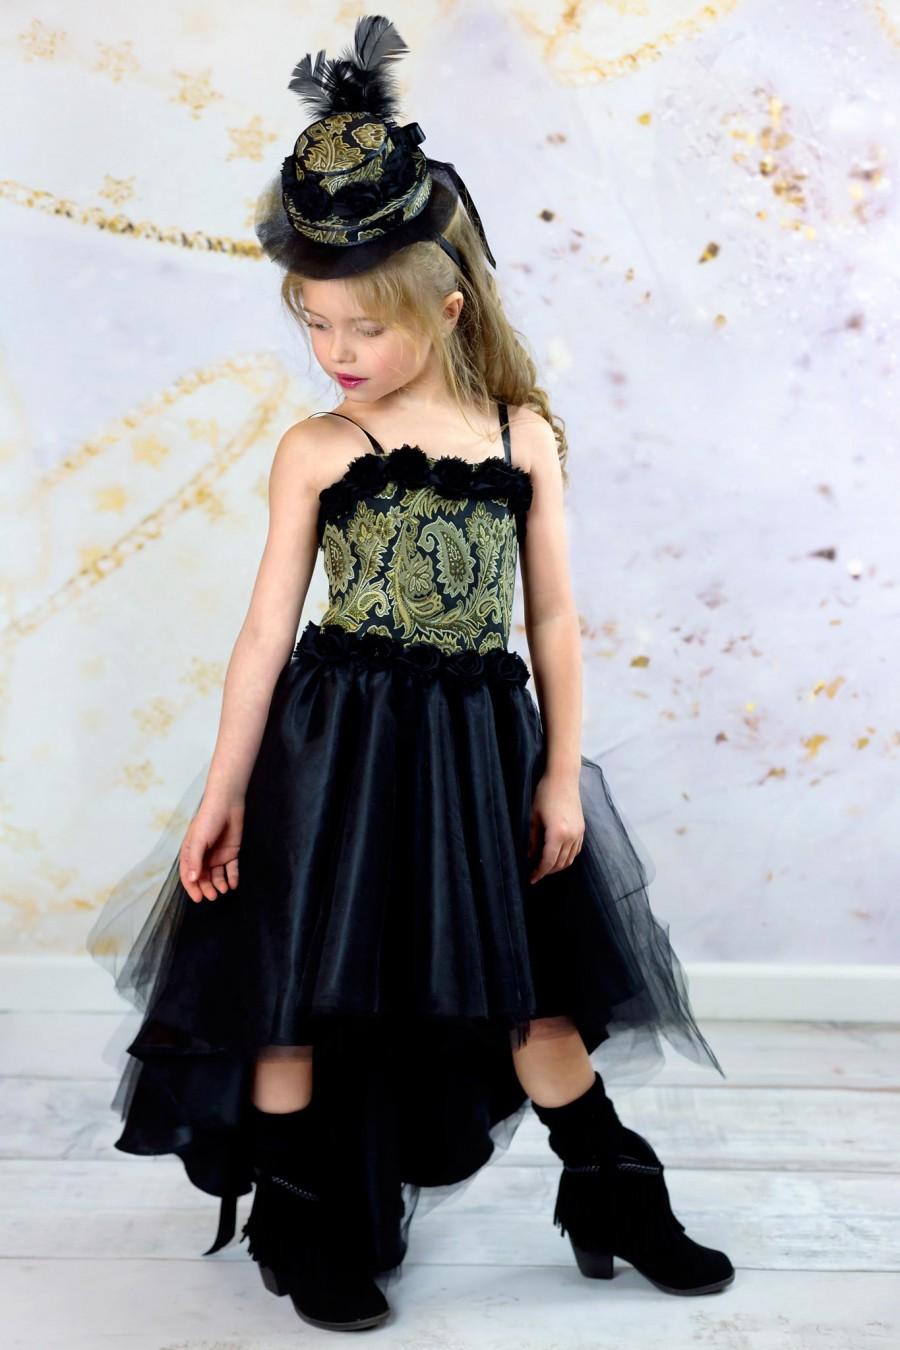 Hochzeit - Girls Haute Couture Dress - Black and Gold Corset Dress - Pageant Gown - High Low Party Dress - Fascinator Hat - Flower Girl Dress 3t to 10